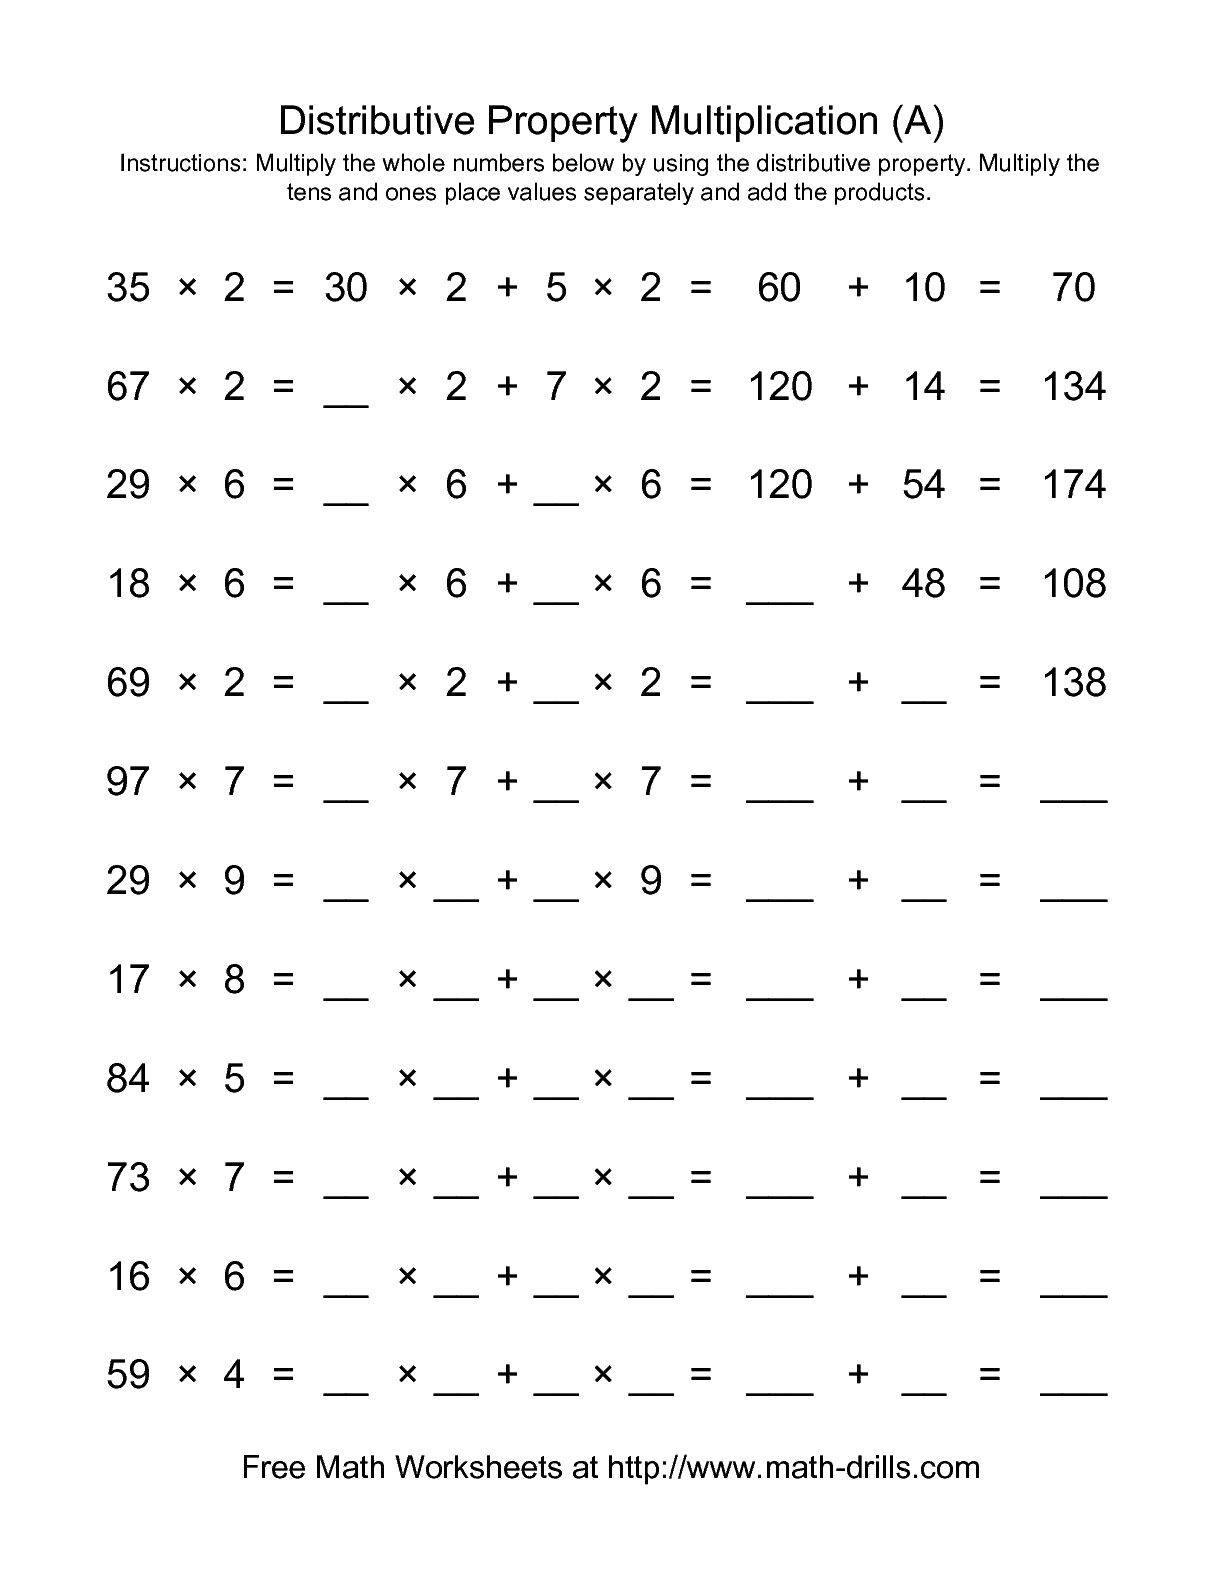 Distributive Property Worksheets with Multiplication Image